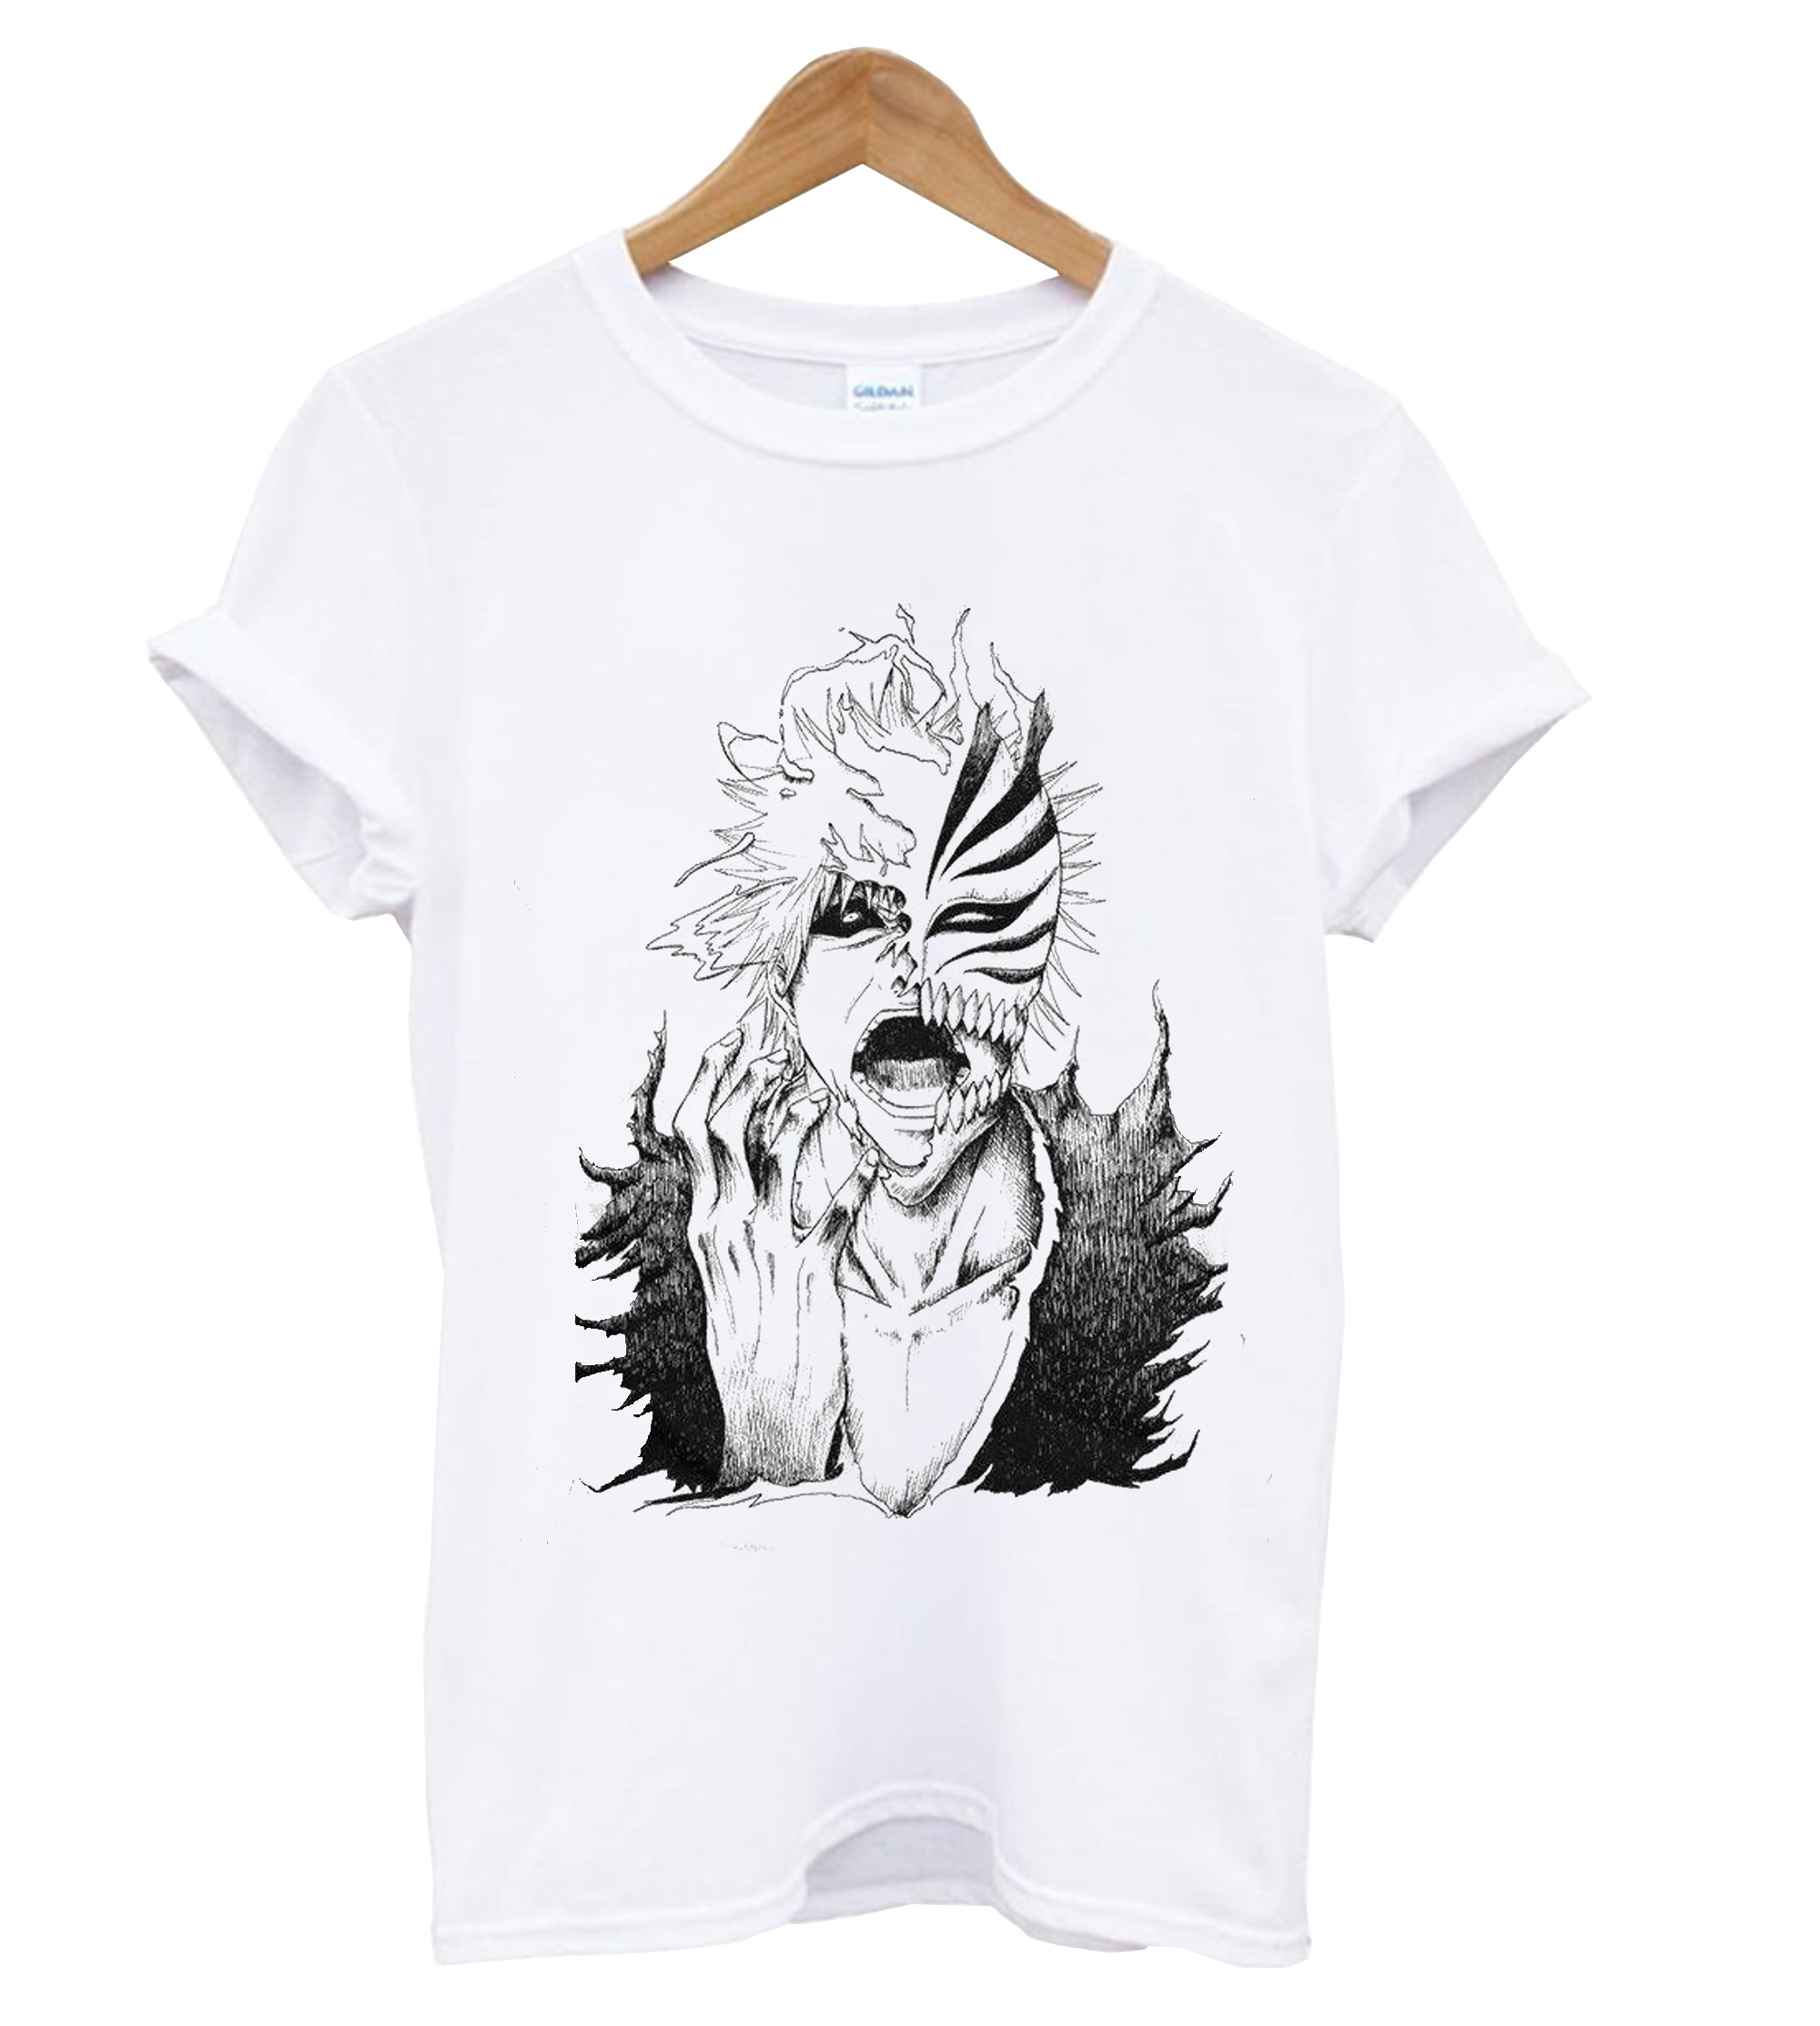 Bleach Anime Manga T Shirt Which Is Made Following Trends Today